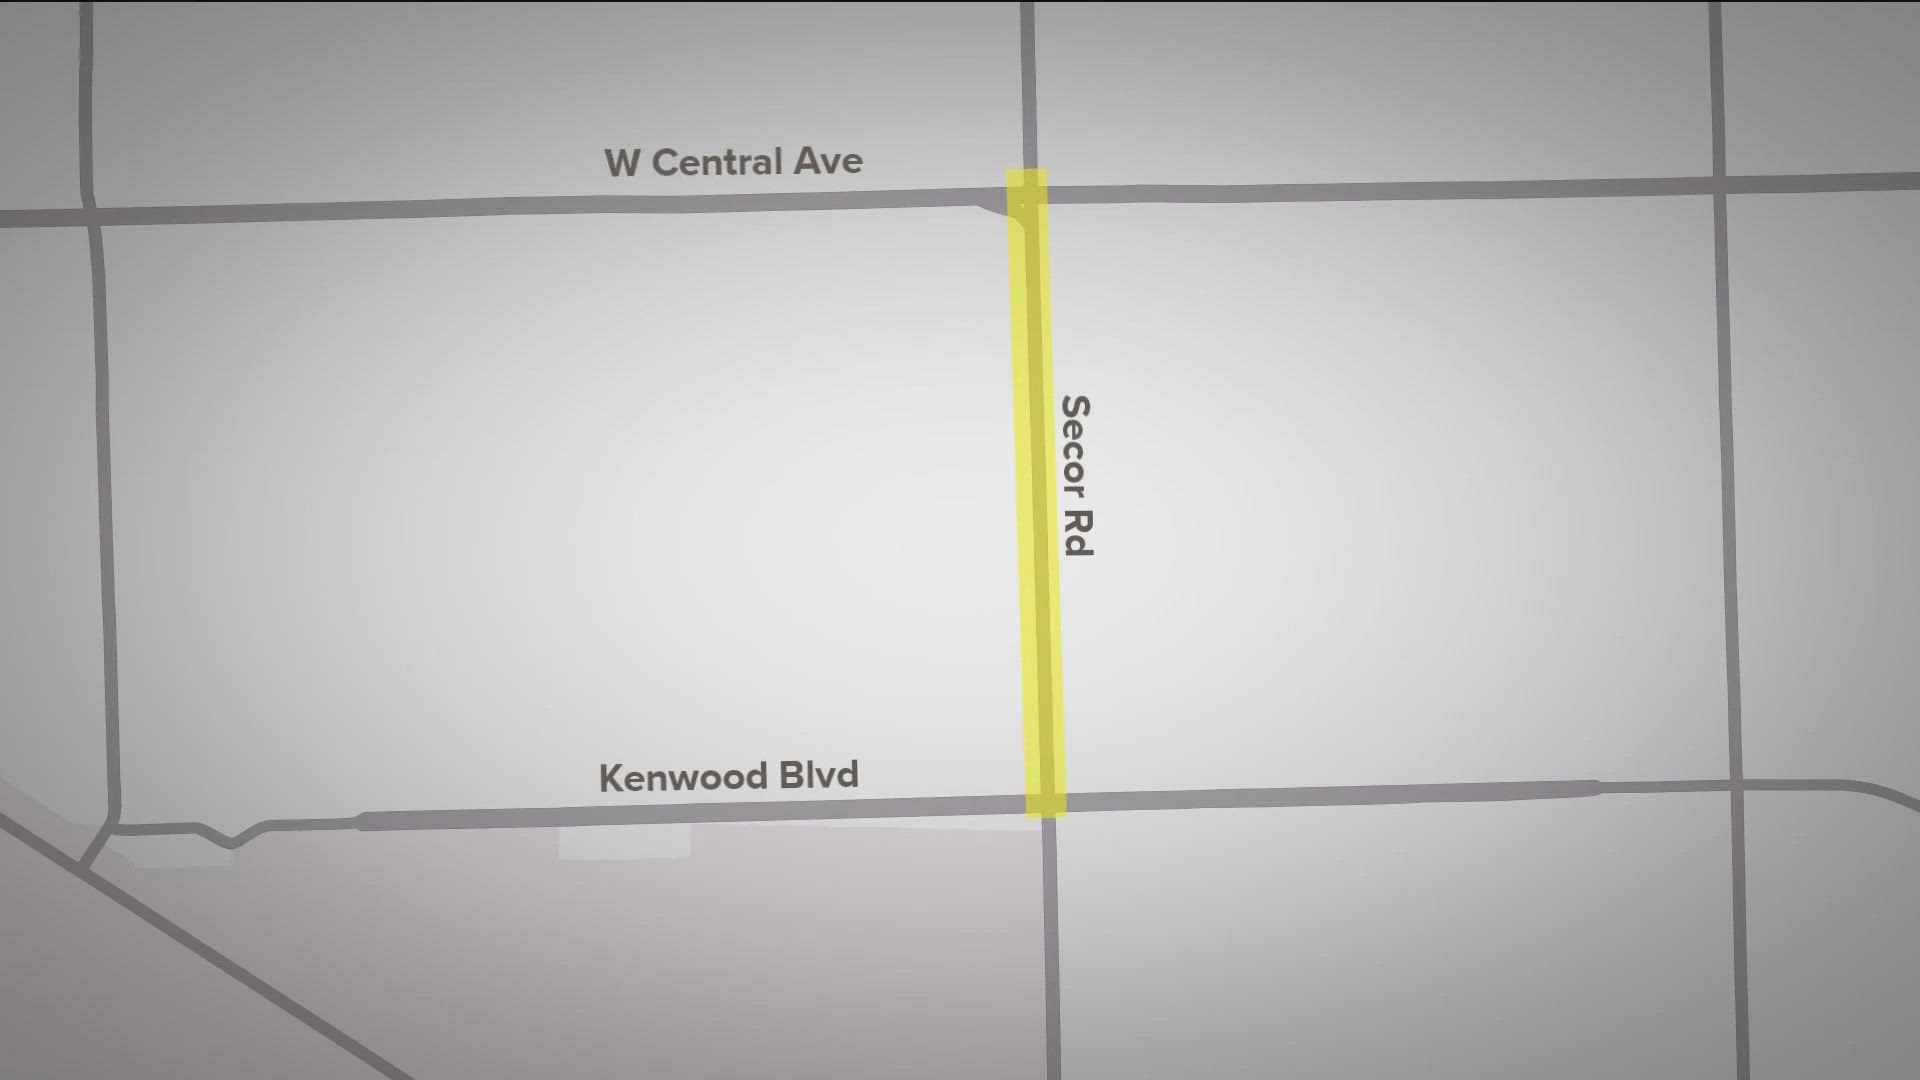 The Toledo Department of Transportation wants to re-design Secor road between Central Avenue and Kenwood.